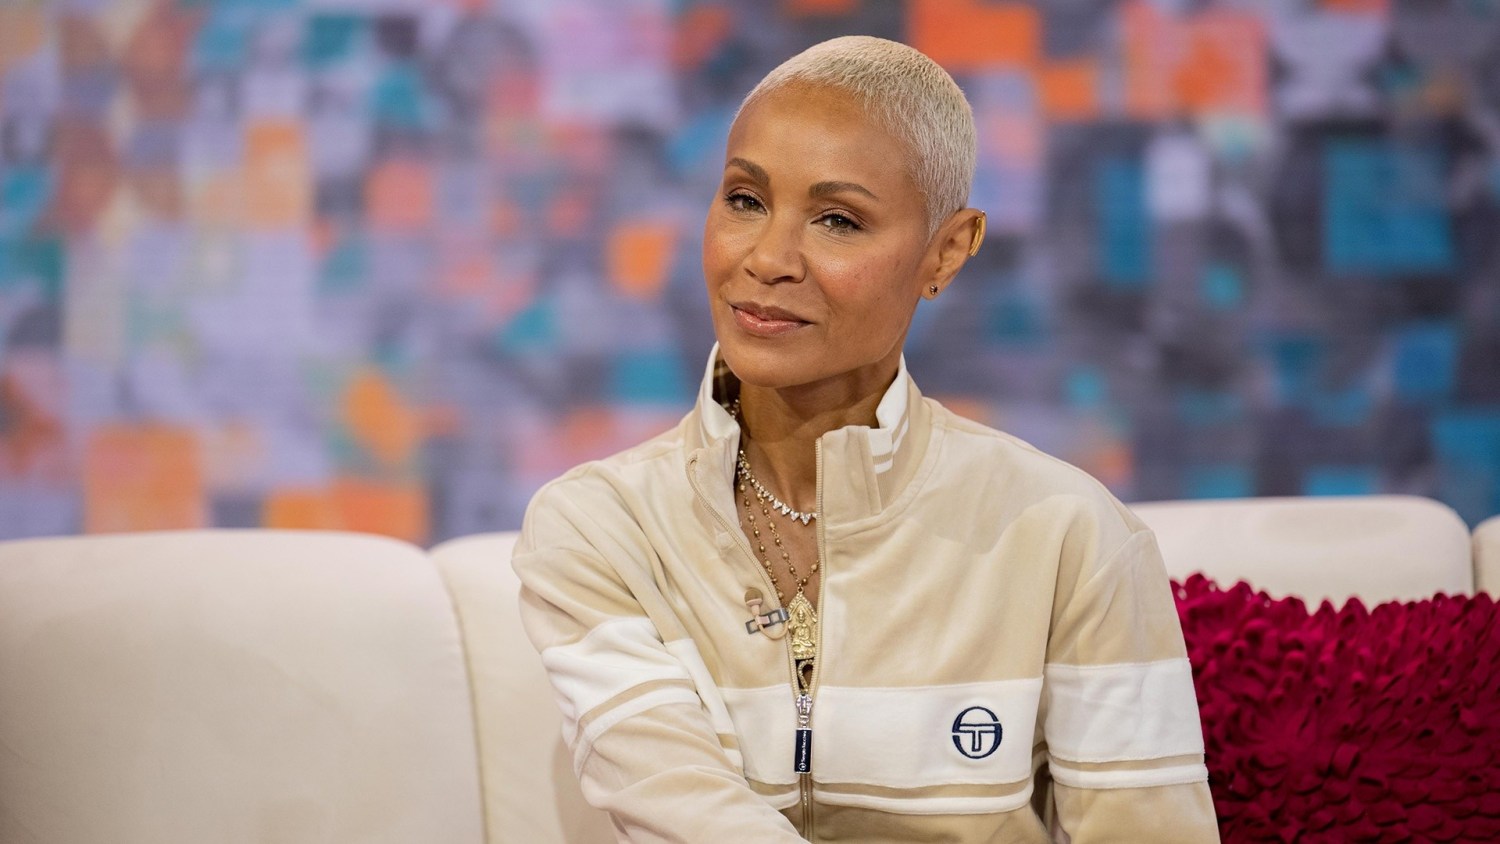 Jada Pinkett Smith explained why son Jaden Smith moved out at 15